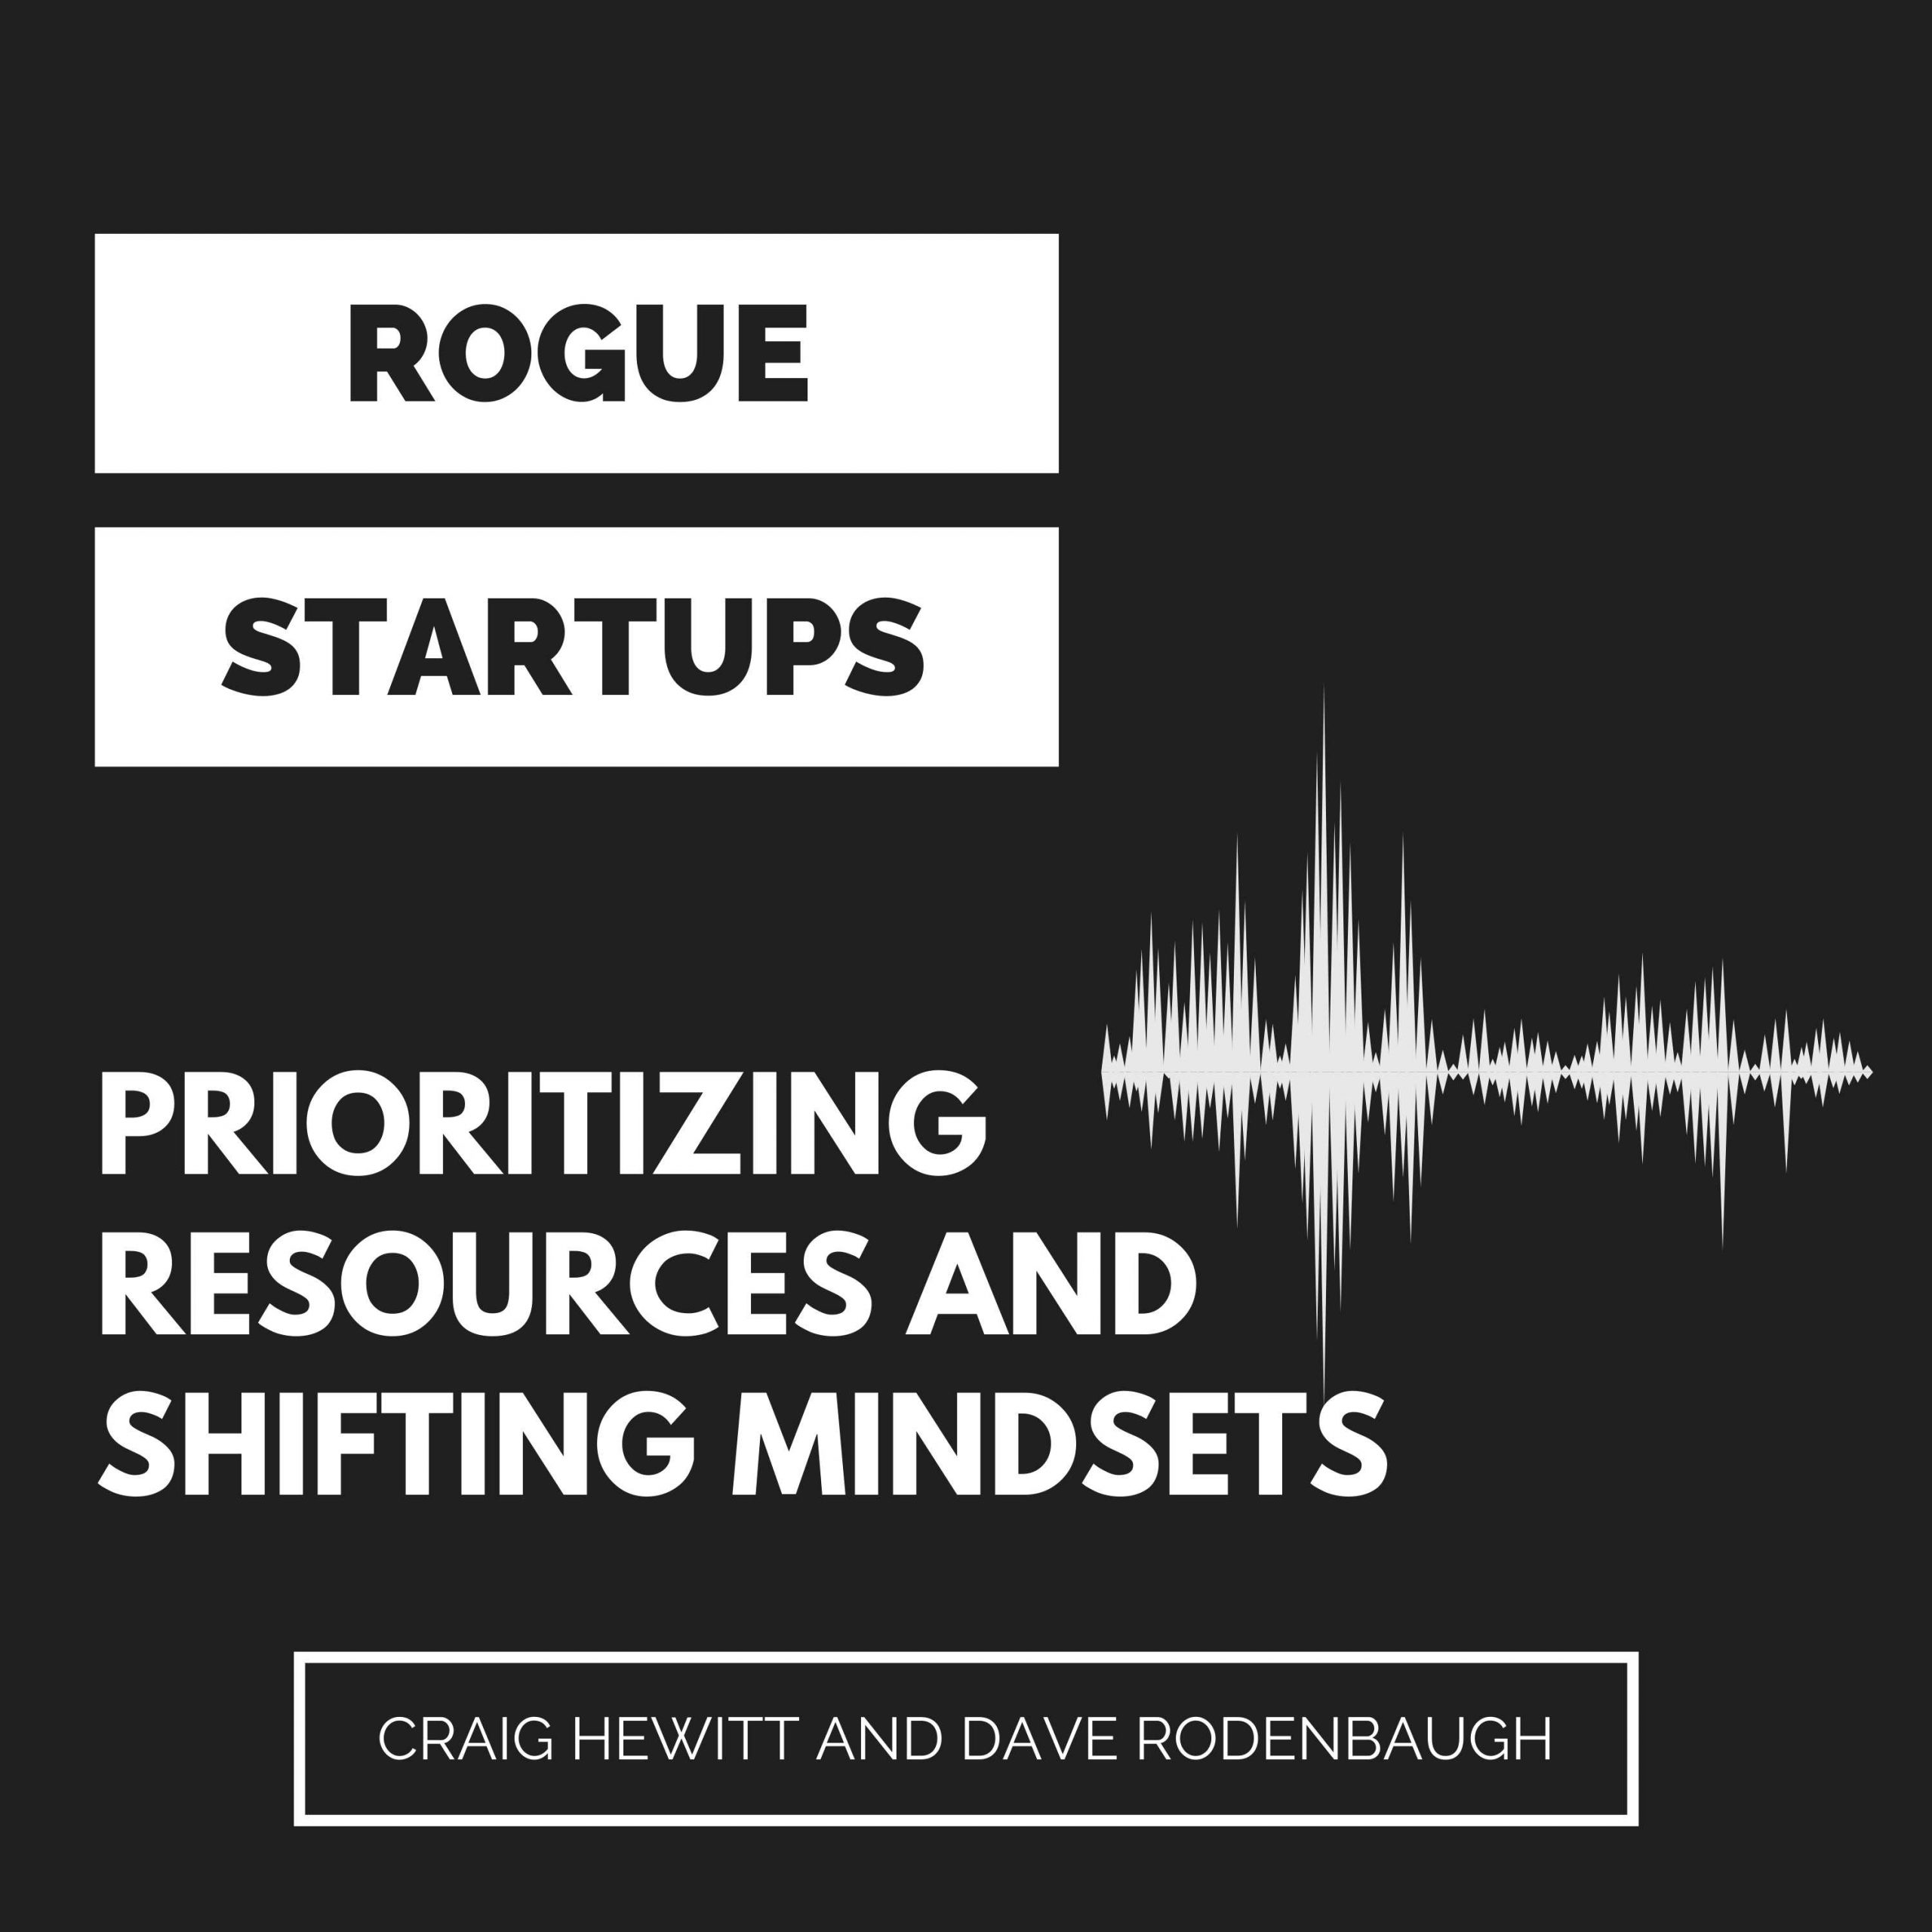 RS246: Prioritizing Resources and Shifting Mindsets